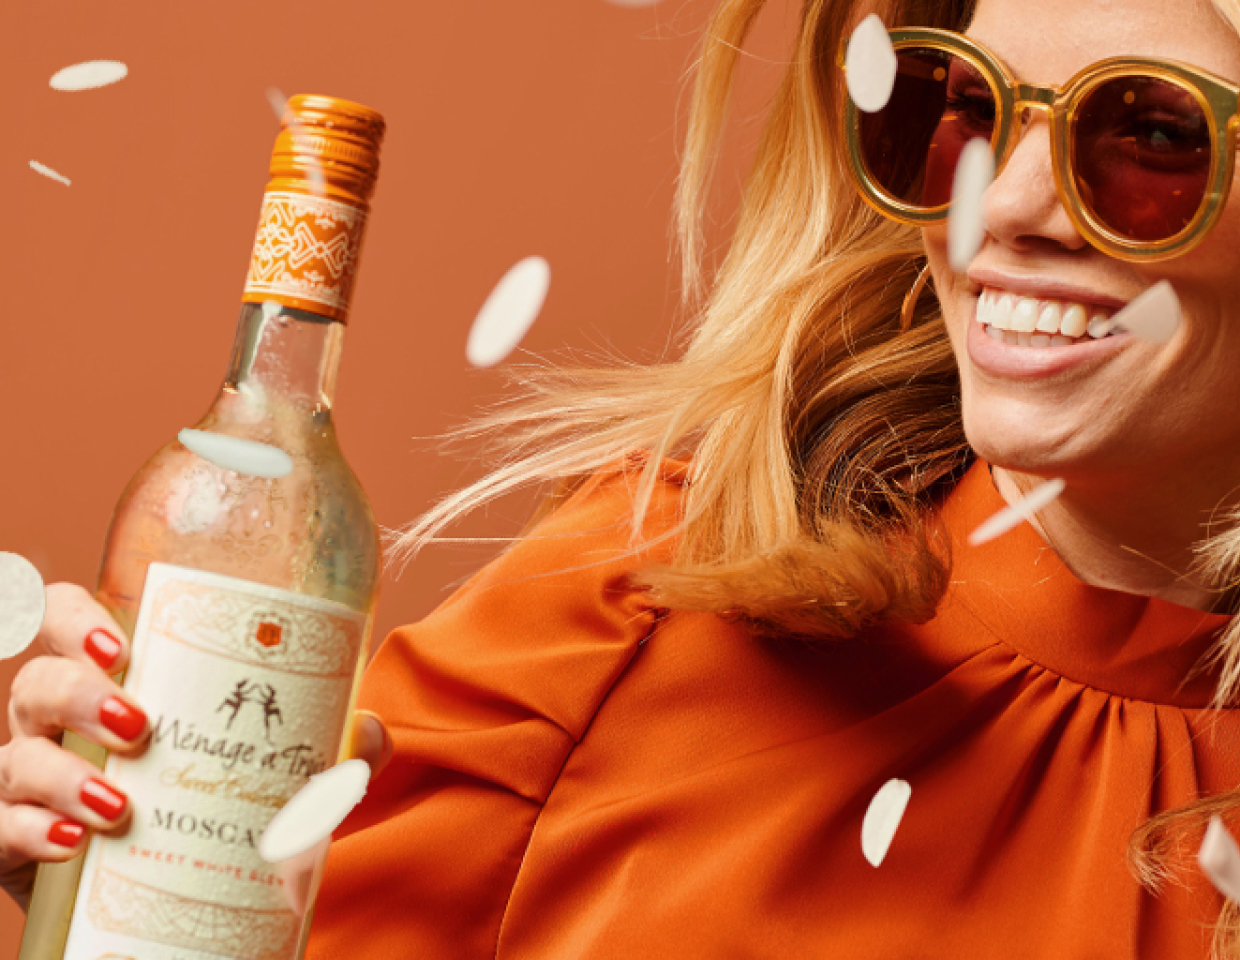 Smiling woman wearing sunglasses and bright orange holding a bottle of Menage a Trois sweet moscato